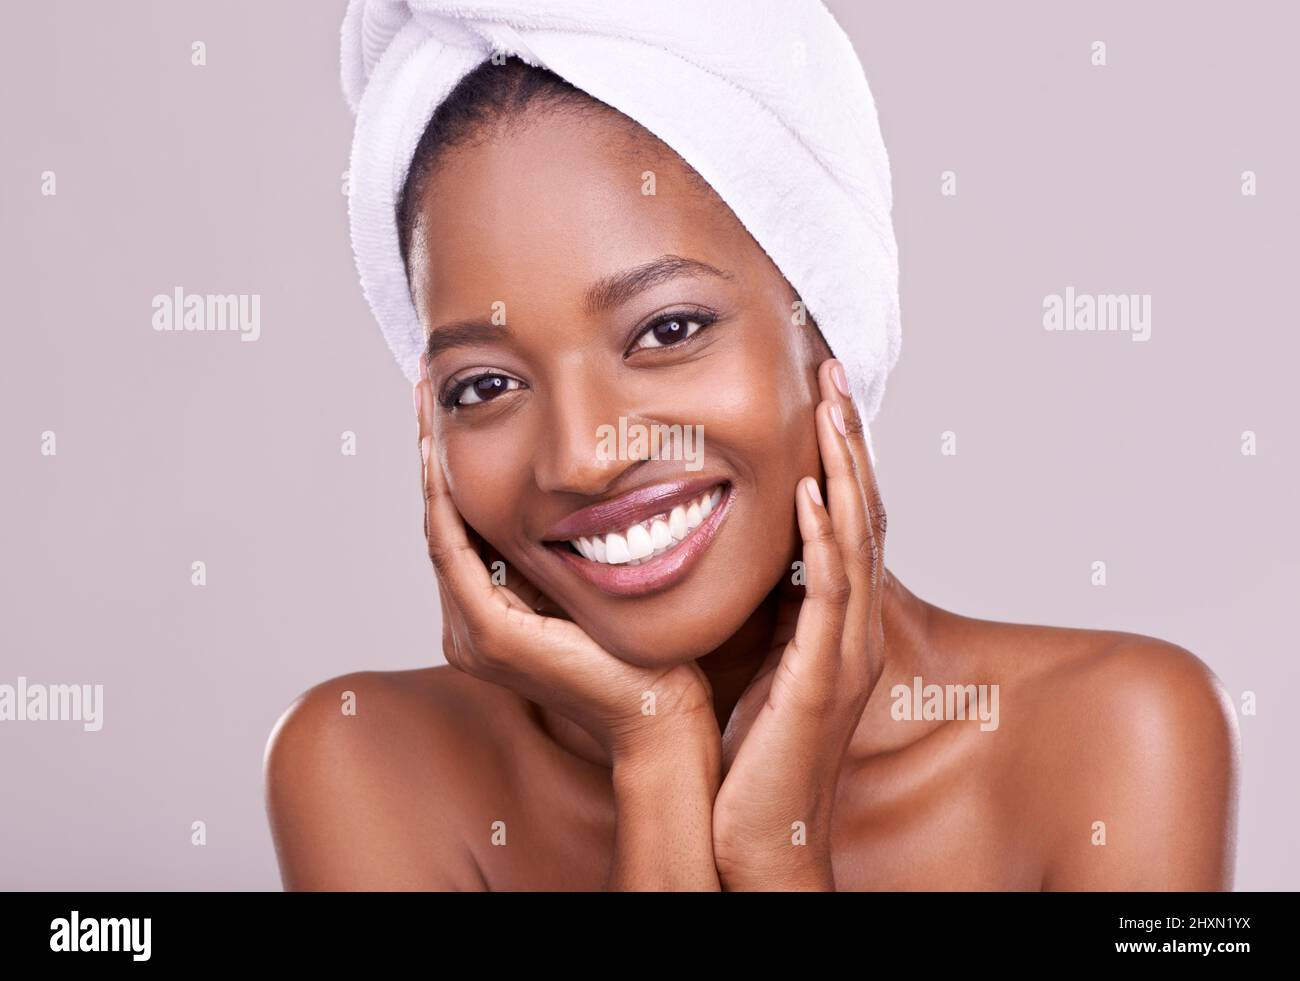 To be beautiful is to be yourself. An isolated studio portrait of a beautiful young woman wearing a towel on her head. Stock Photo